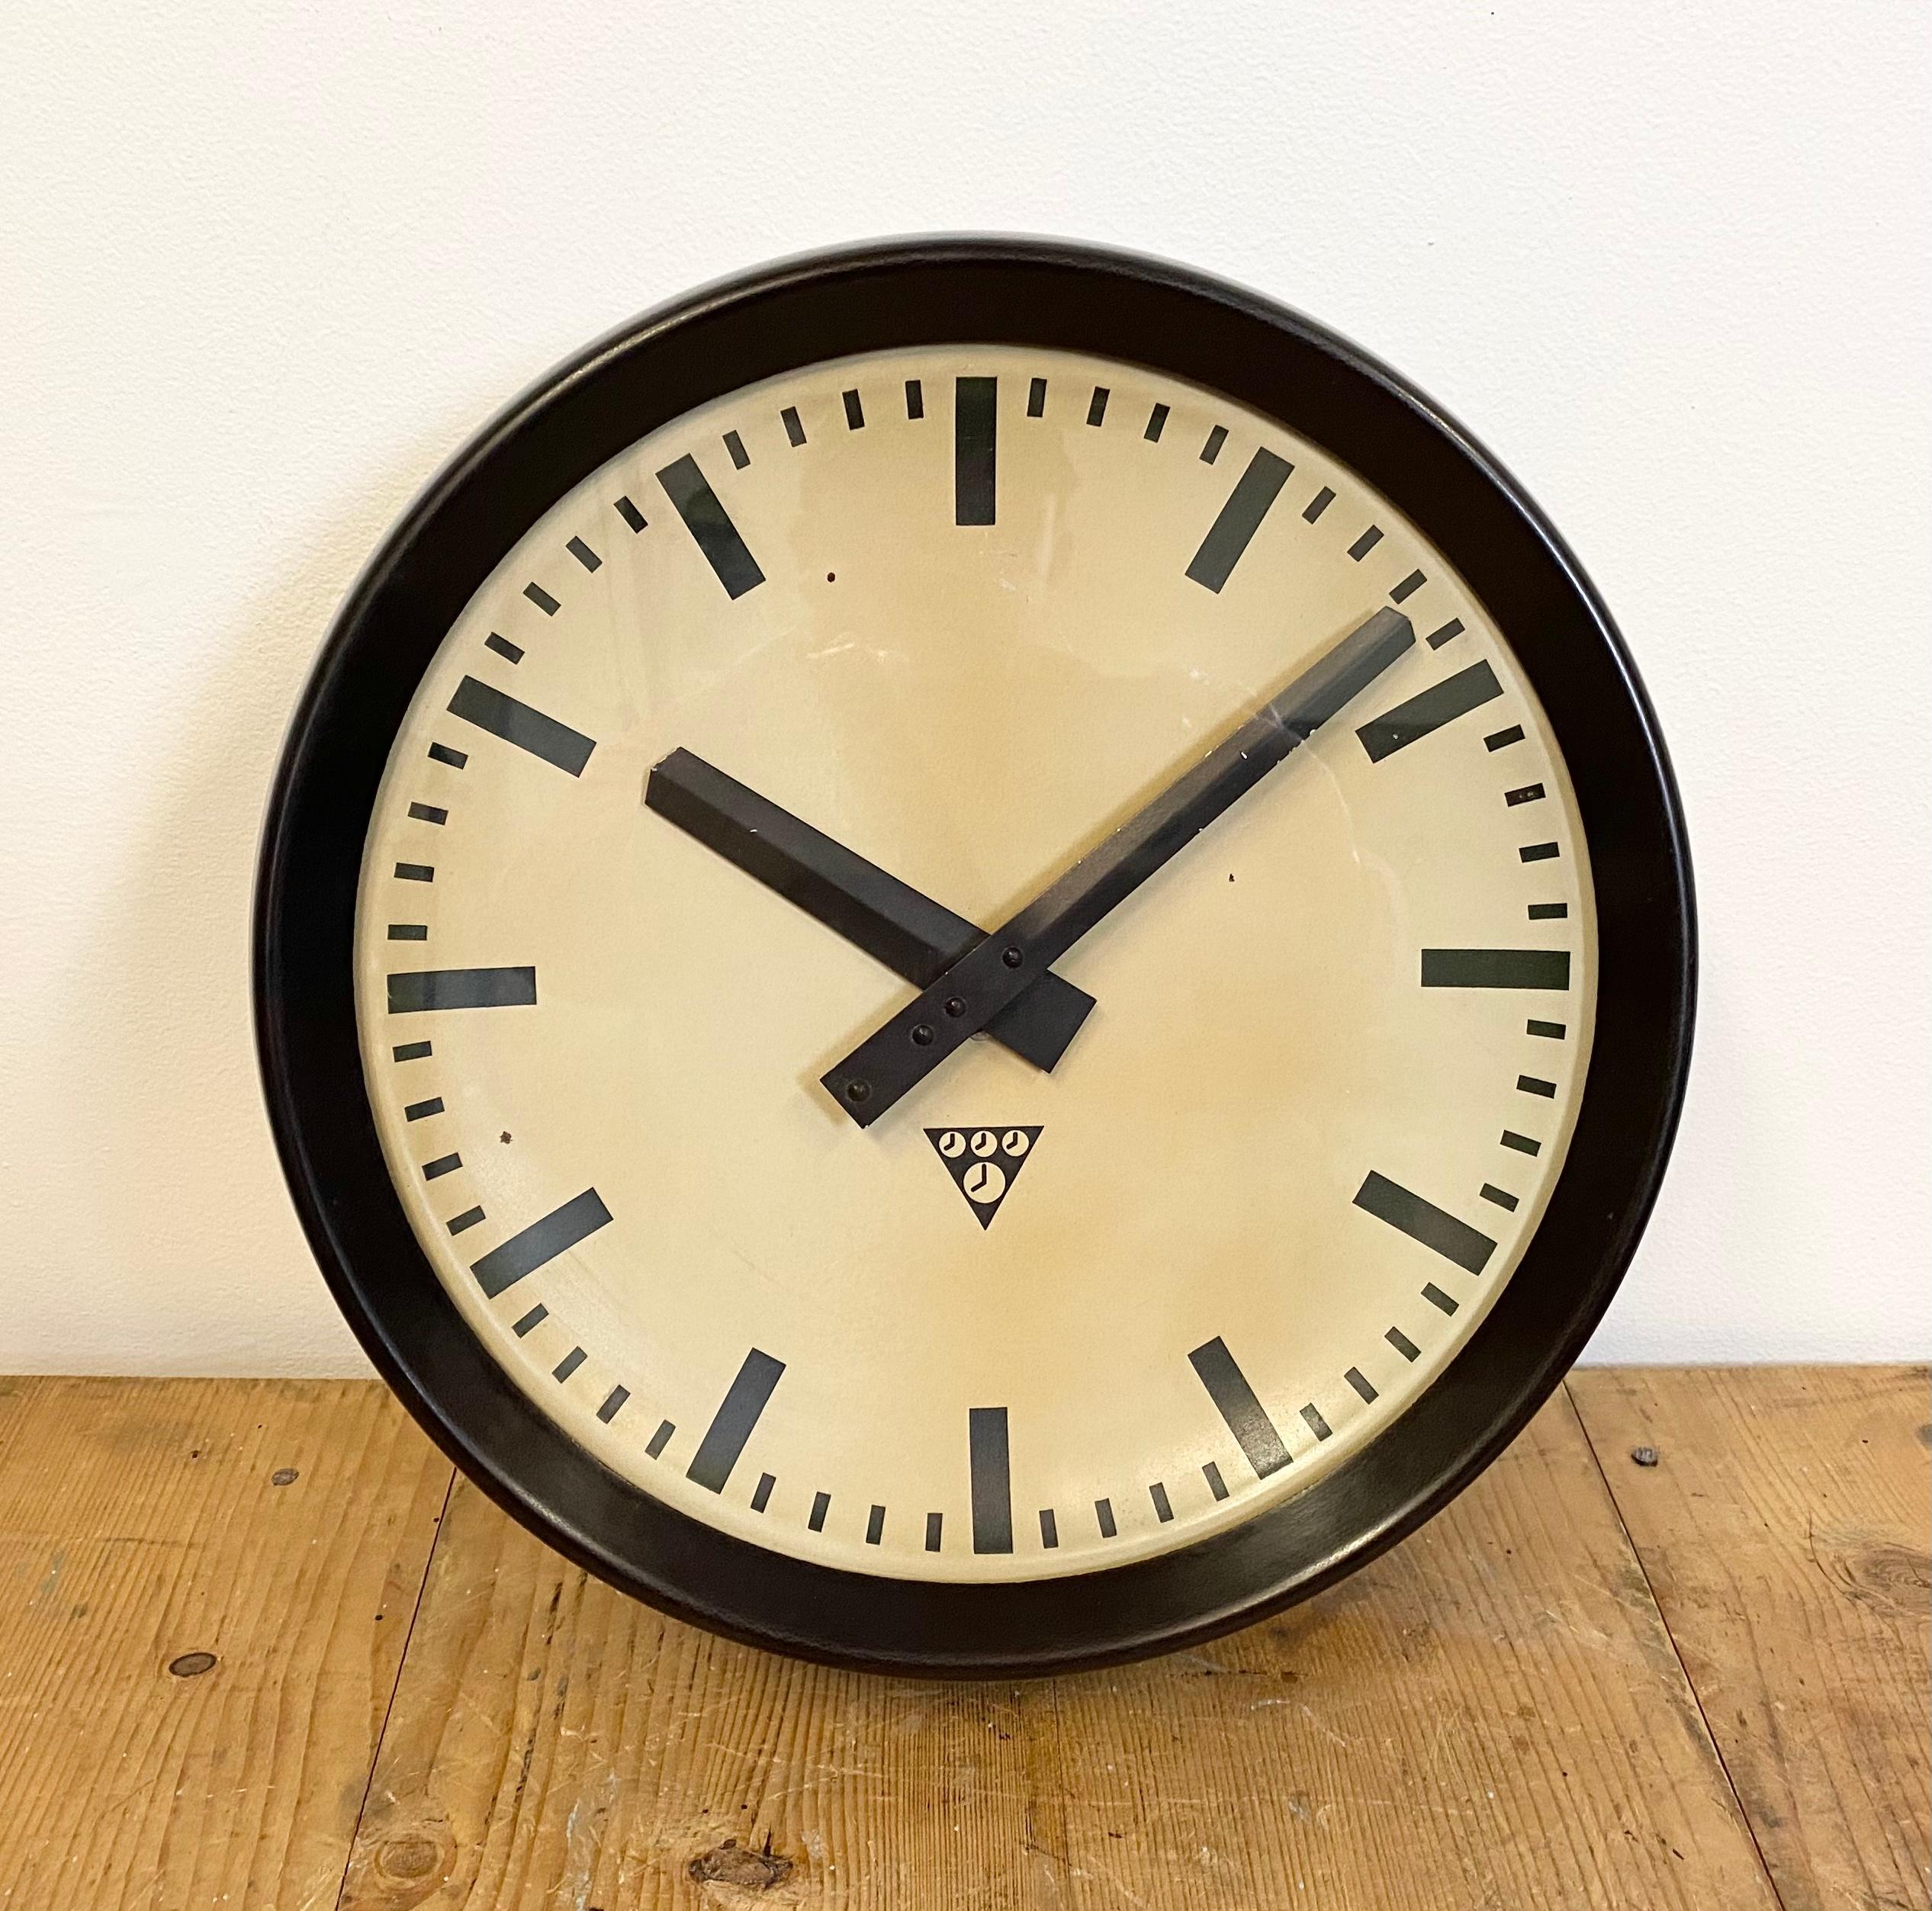 This wall clock was produced by Pragotron in former Czechoslovakia during the 1960s. The piece features a brown bakelite frame, aluminium dial and a clear glass cover. The piece has been converted into a battery-powered clockwork and requires only